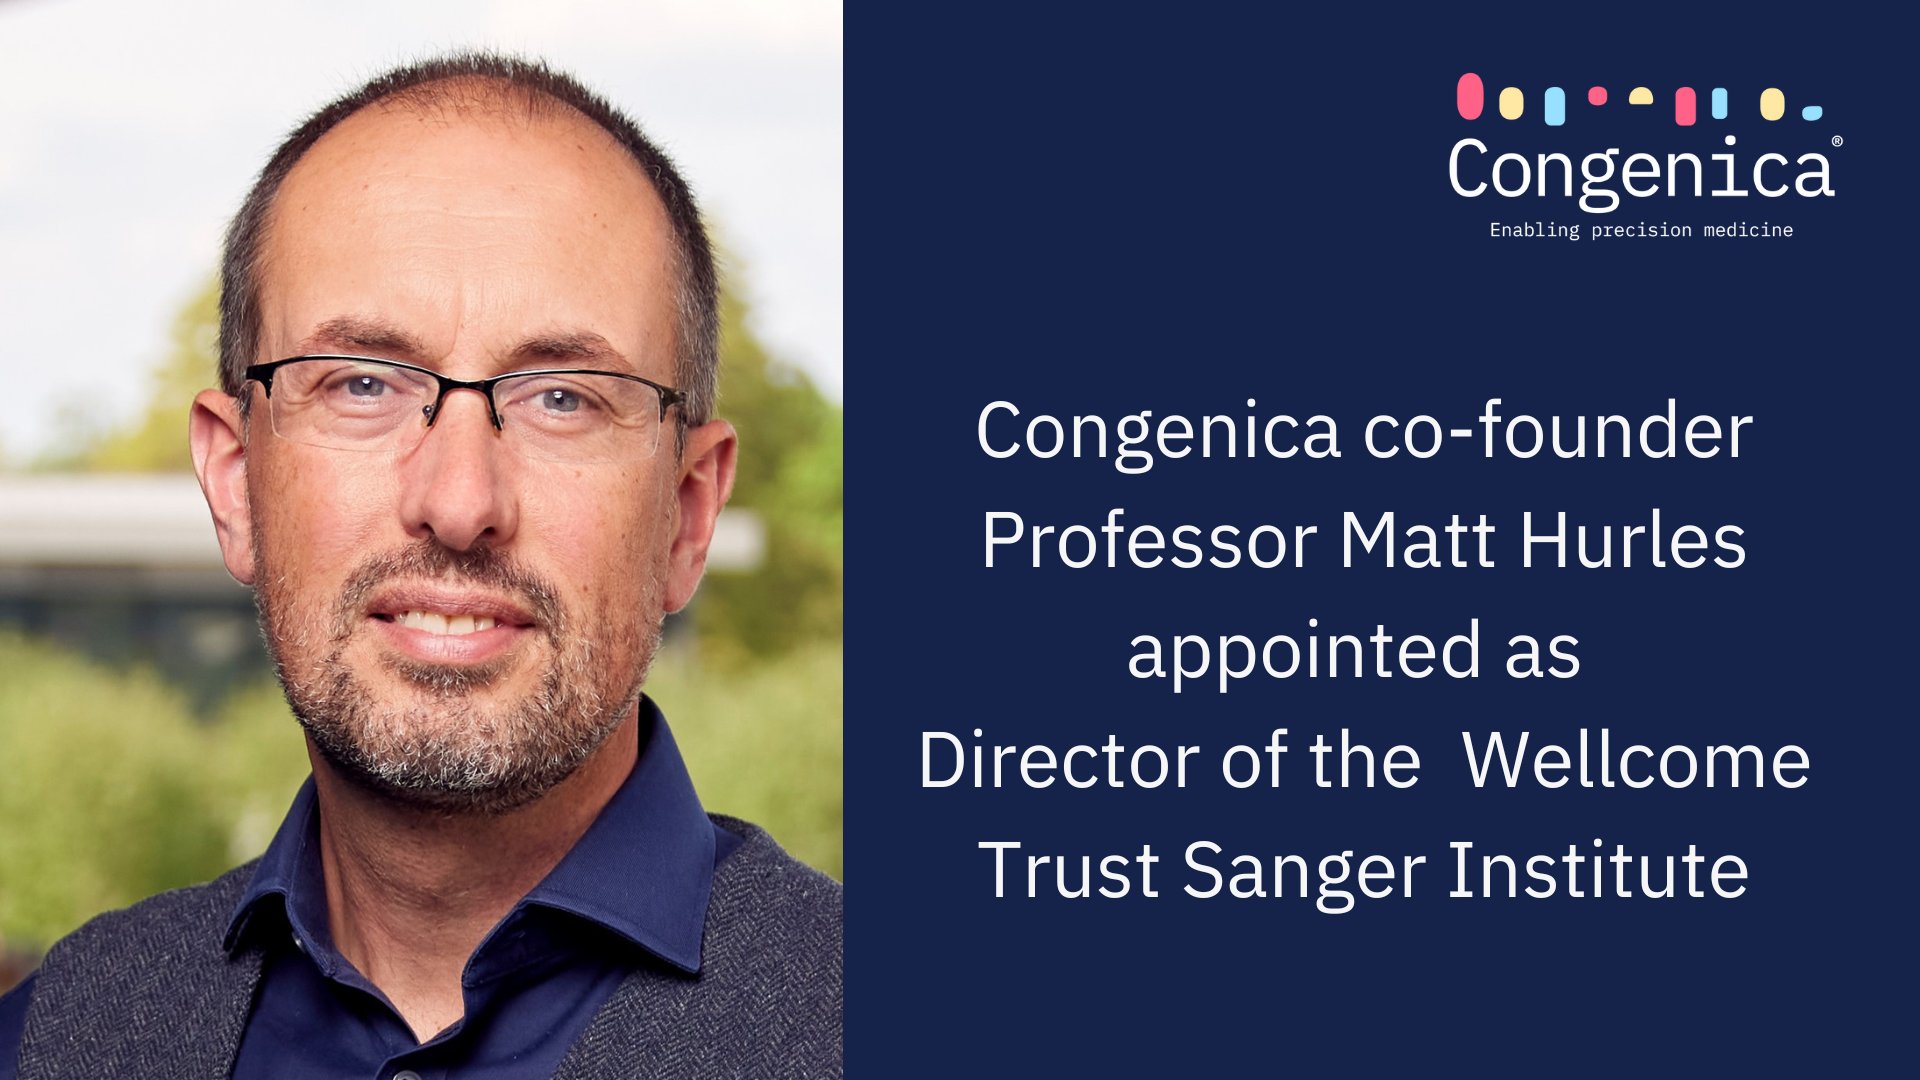 Congenica co-founder Professor Matt Hurles appointed as Director of the Wellcome Sanger Institute